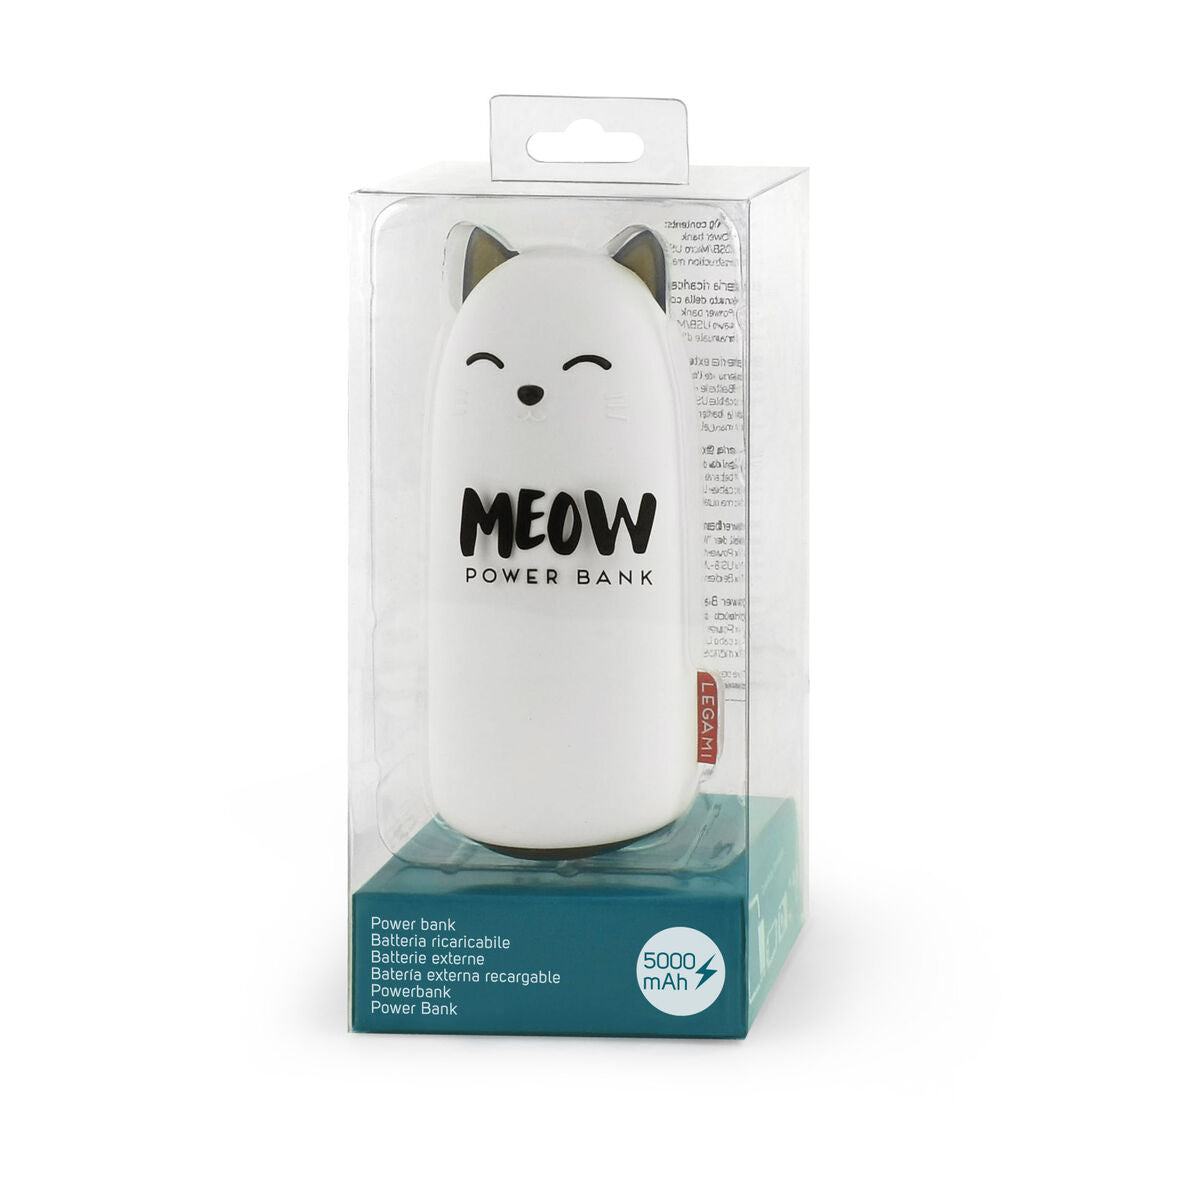 Tech | Legami Power Bank - Meow by Weirs of Baggot St